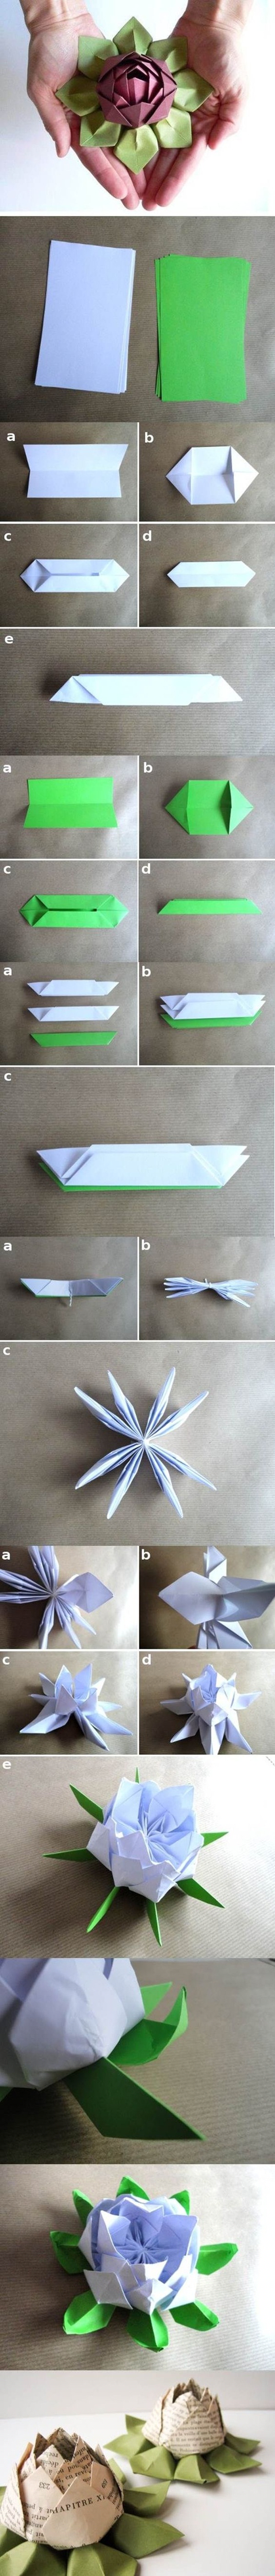 Easy-Origami-for-Kids16 DIY Easy Origami Paper Craft Tutorials (Step by Step)